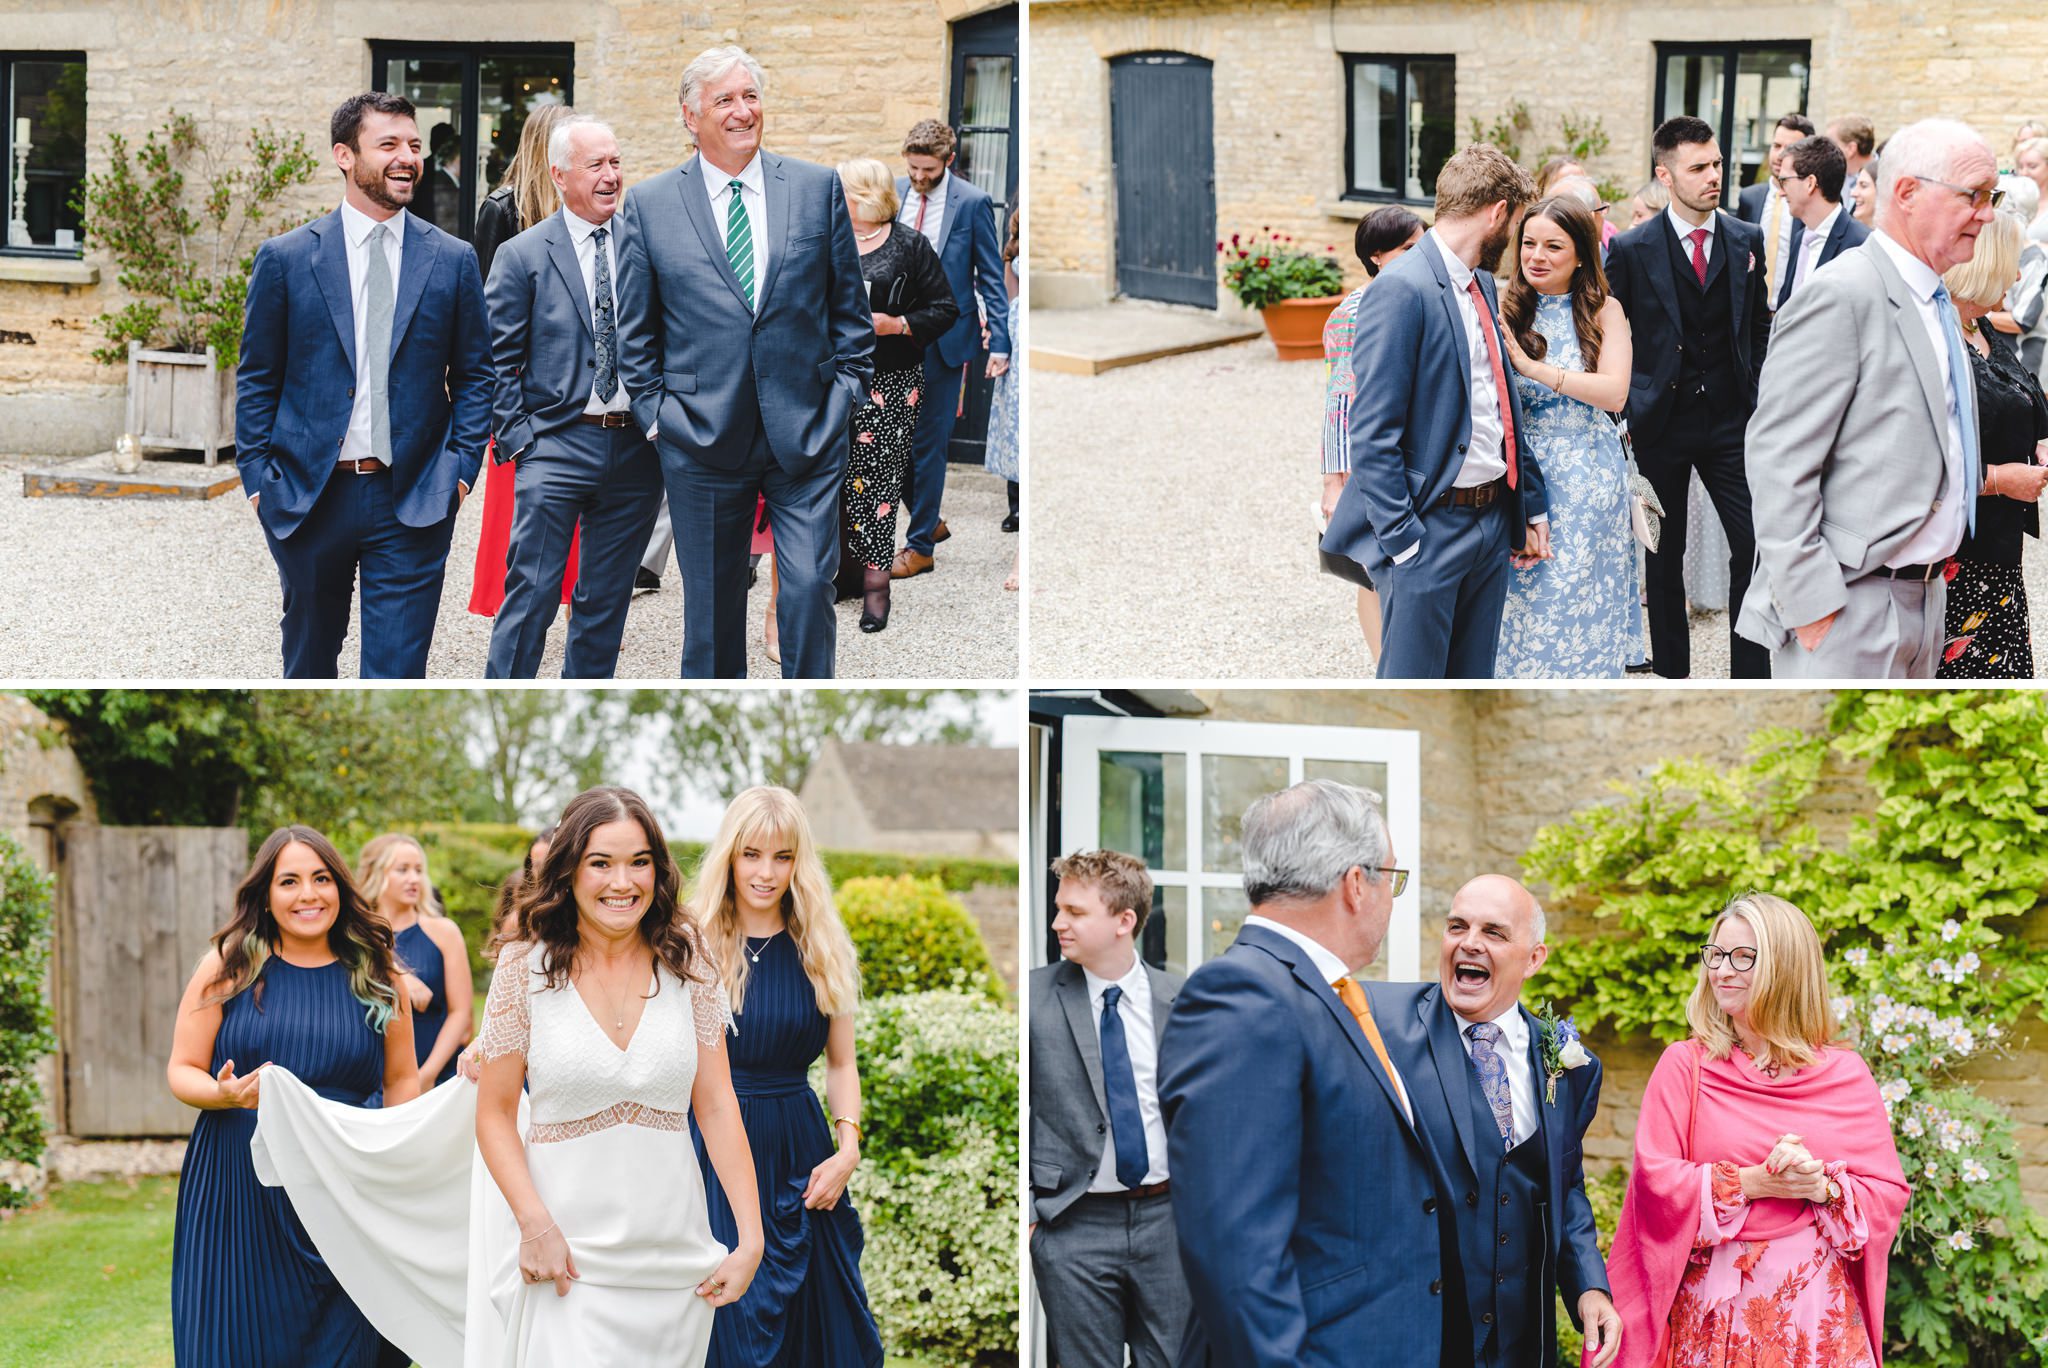 Guests at a wedding in Gloucestershire